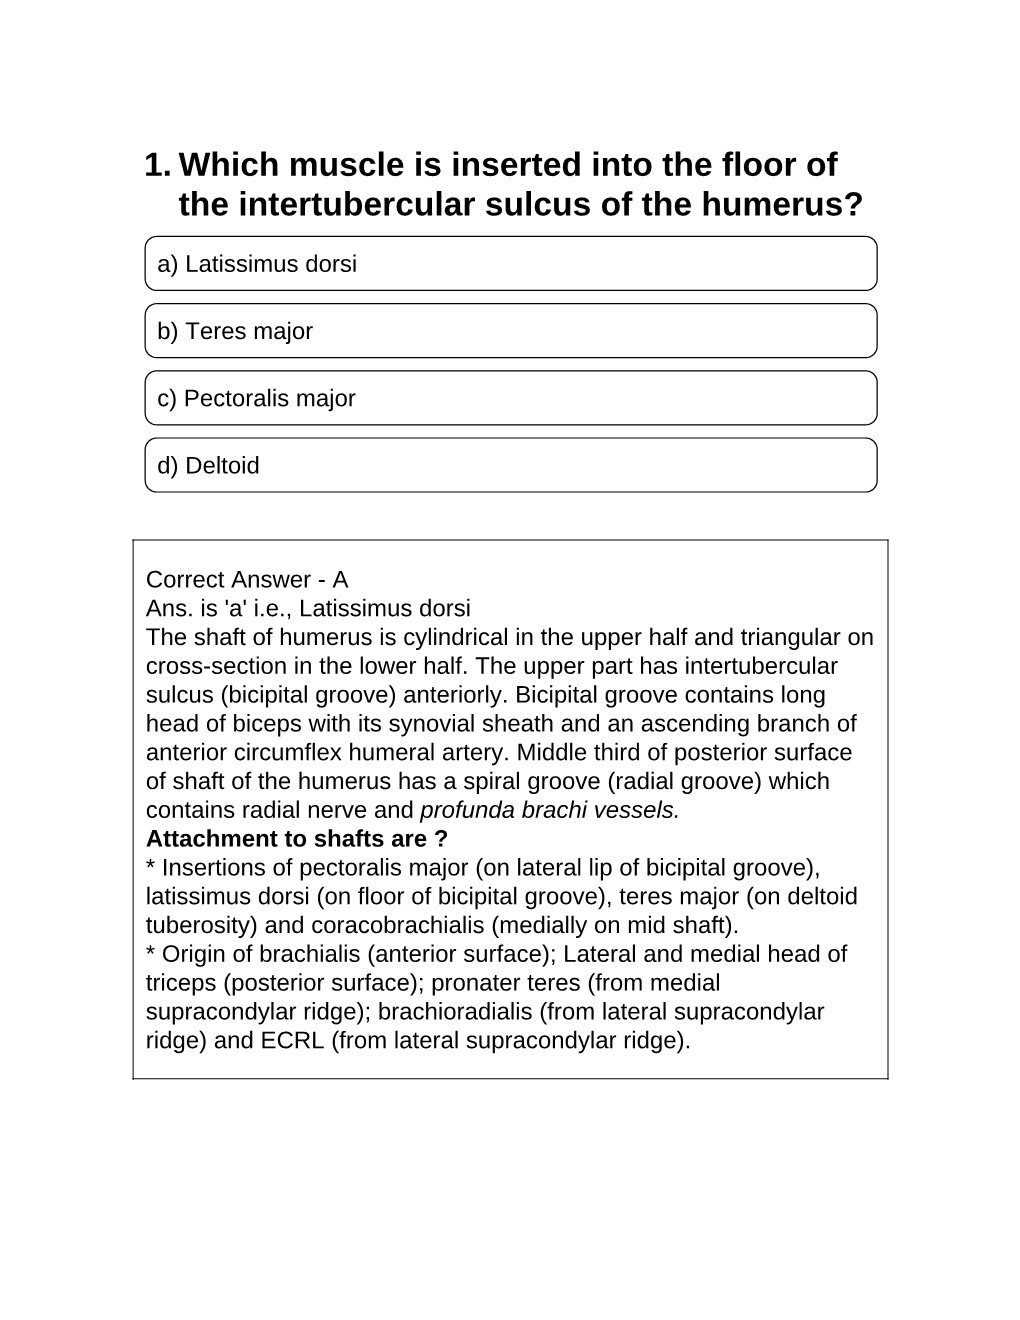 1. Which Muscle Is Inserted Into the Floor of the Intertubercular Sulcus of the Humerus?